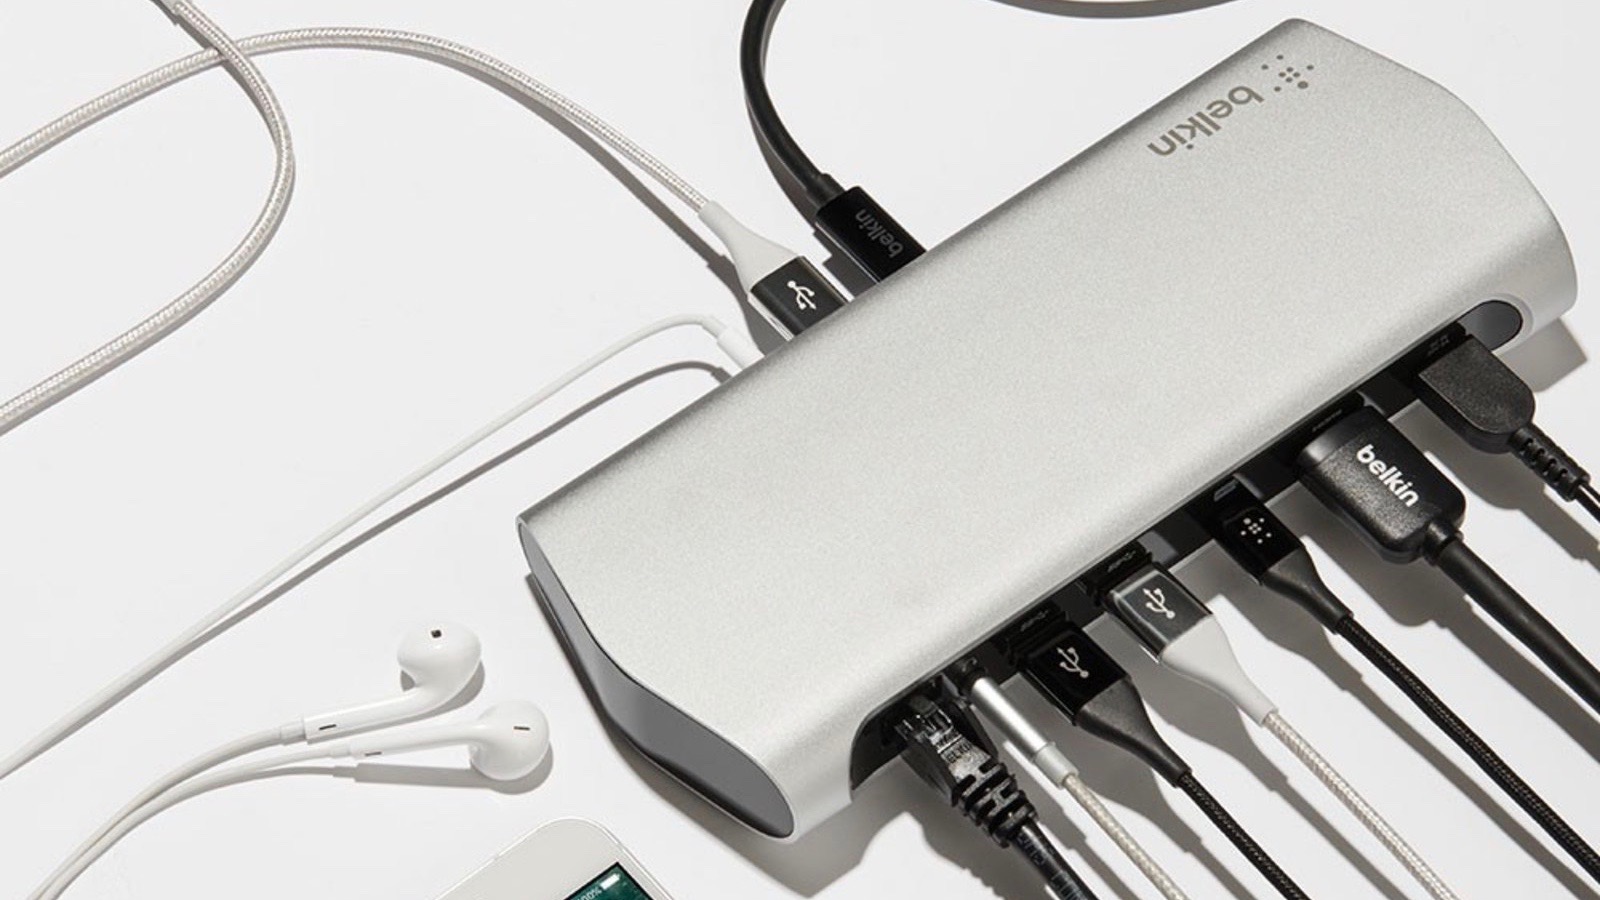 Belkin Announces New Usb C Hub With Hdmi Usb A And More 9to5mac